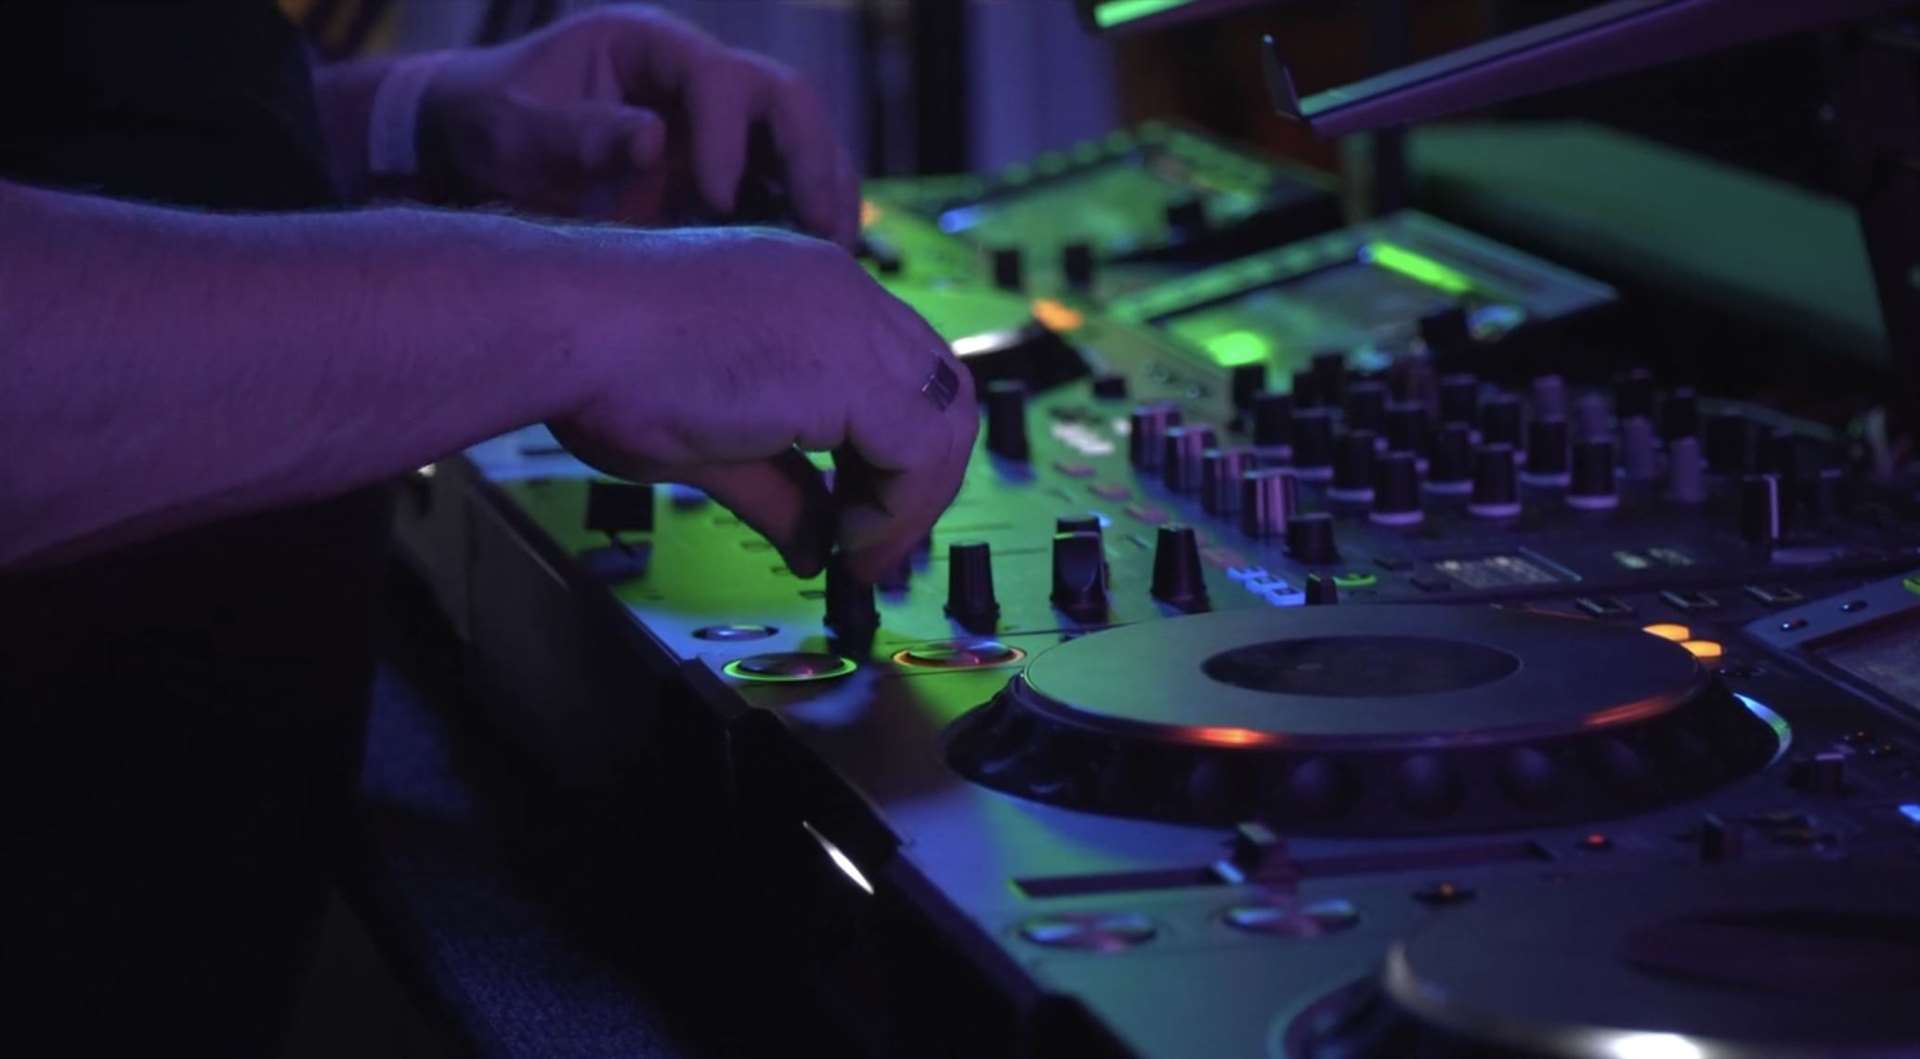 The DJ studio has lost 70% of its clients since the ULEZ charge was introduced